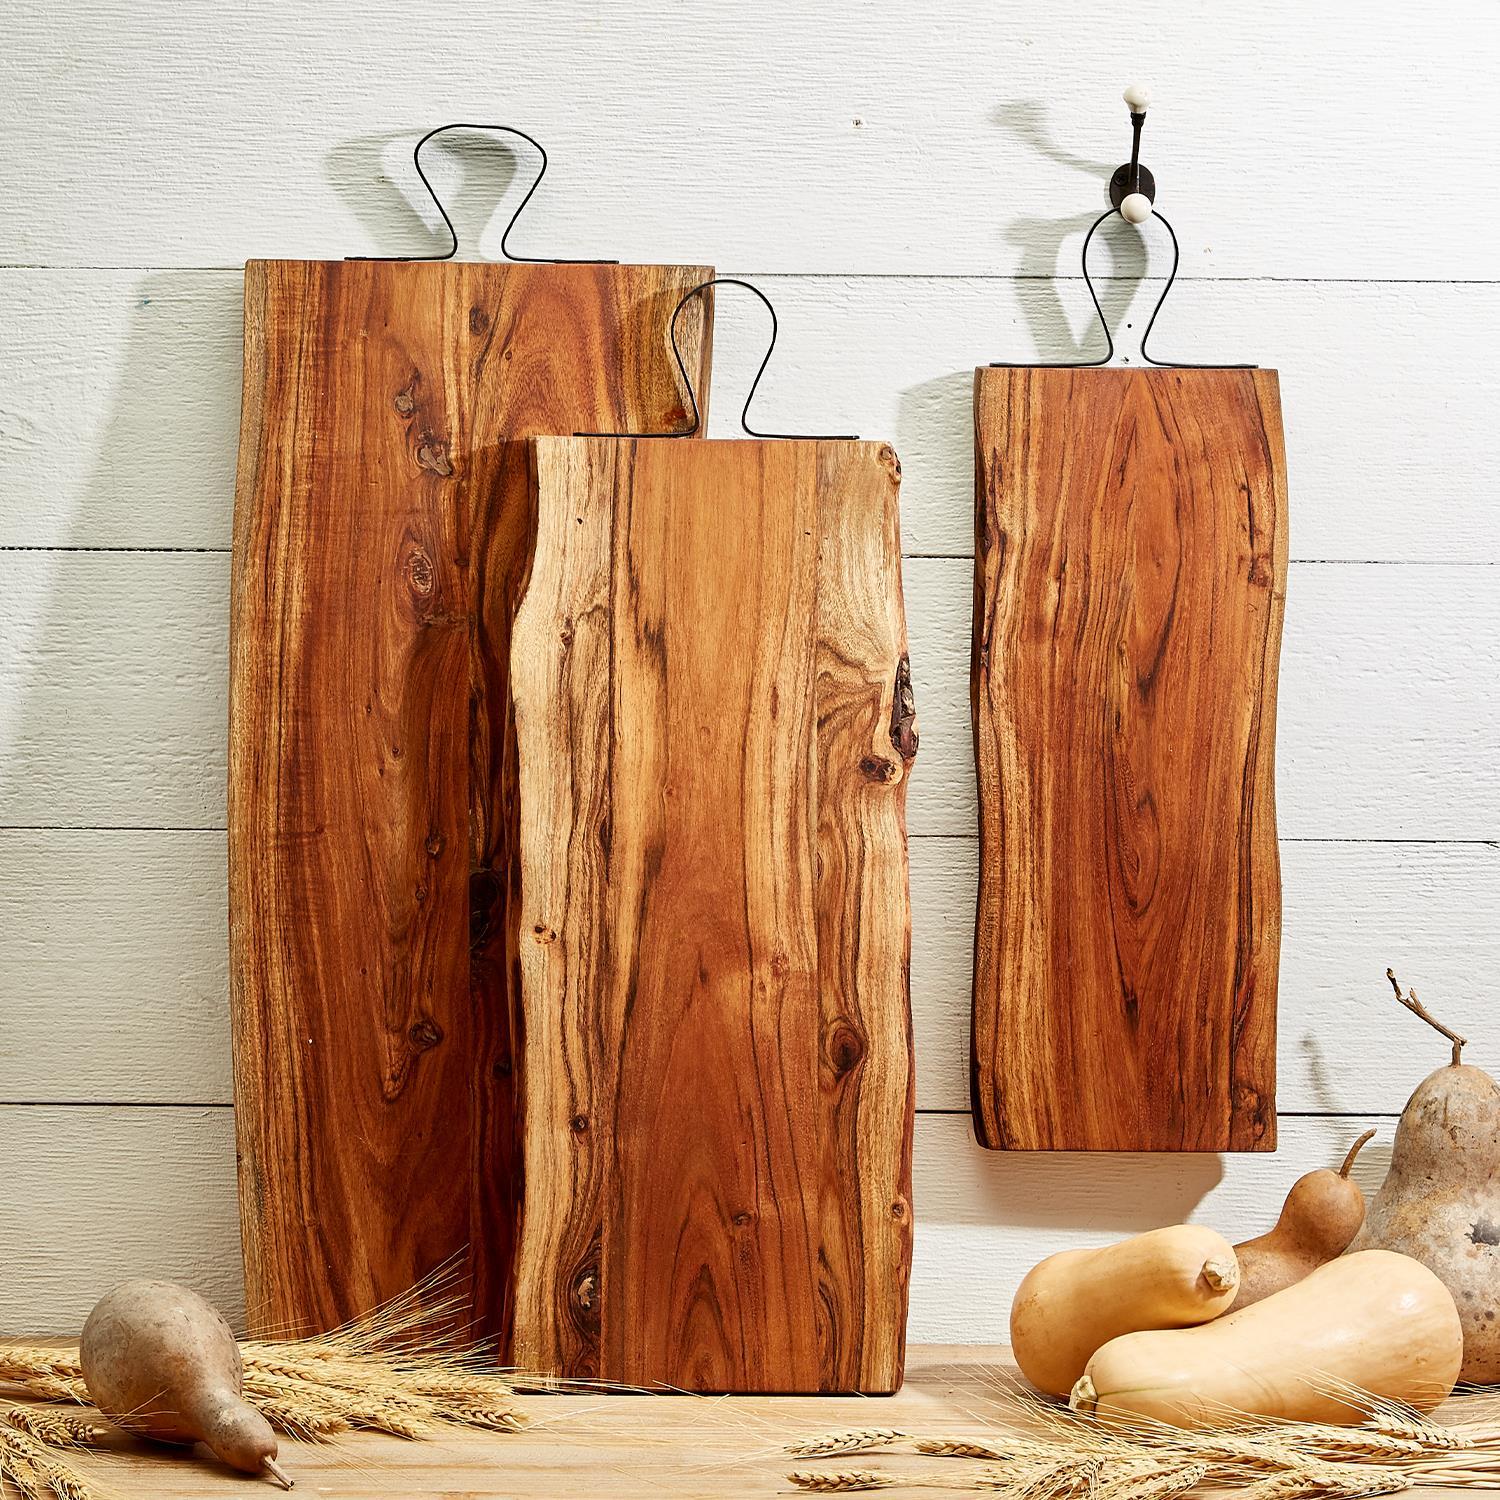 Wood Cutting Board with Handle